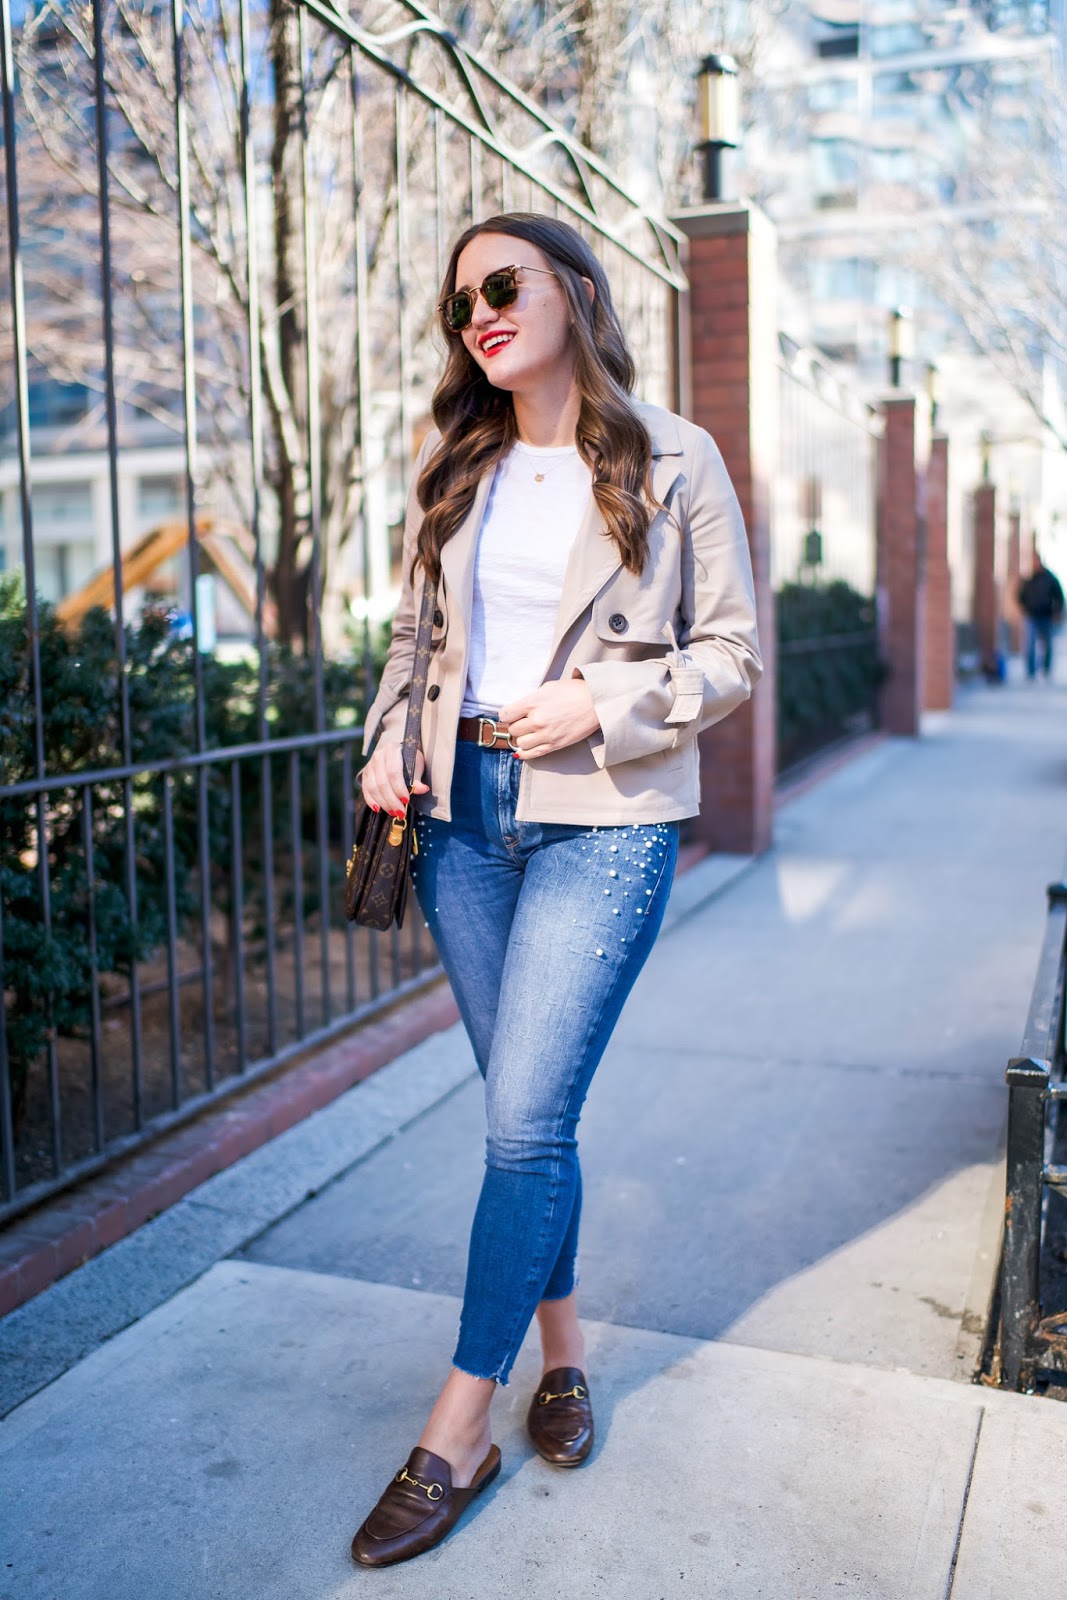 Cute Outfit by popular New York style blogger Covering the Bases